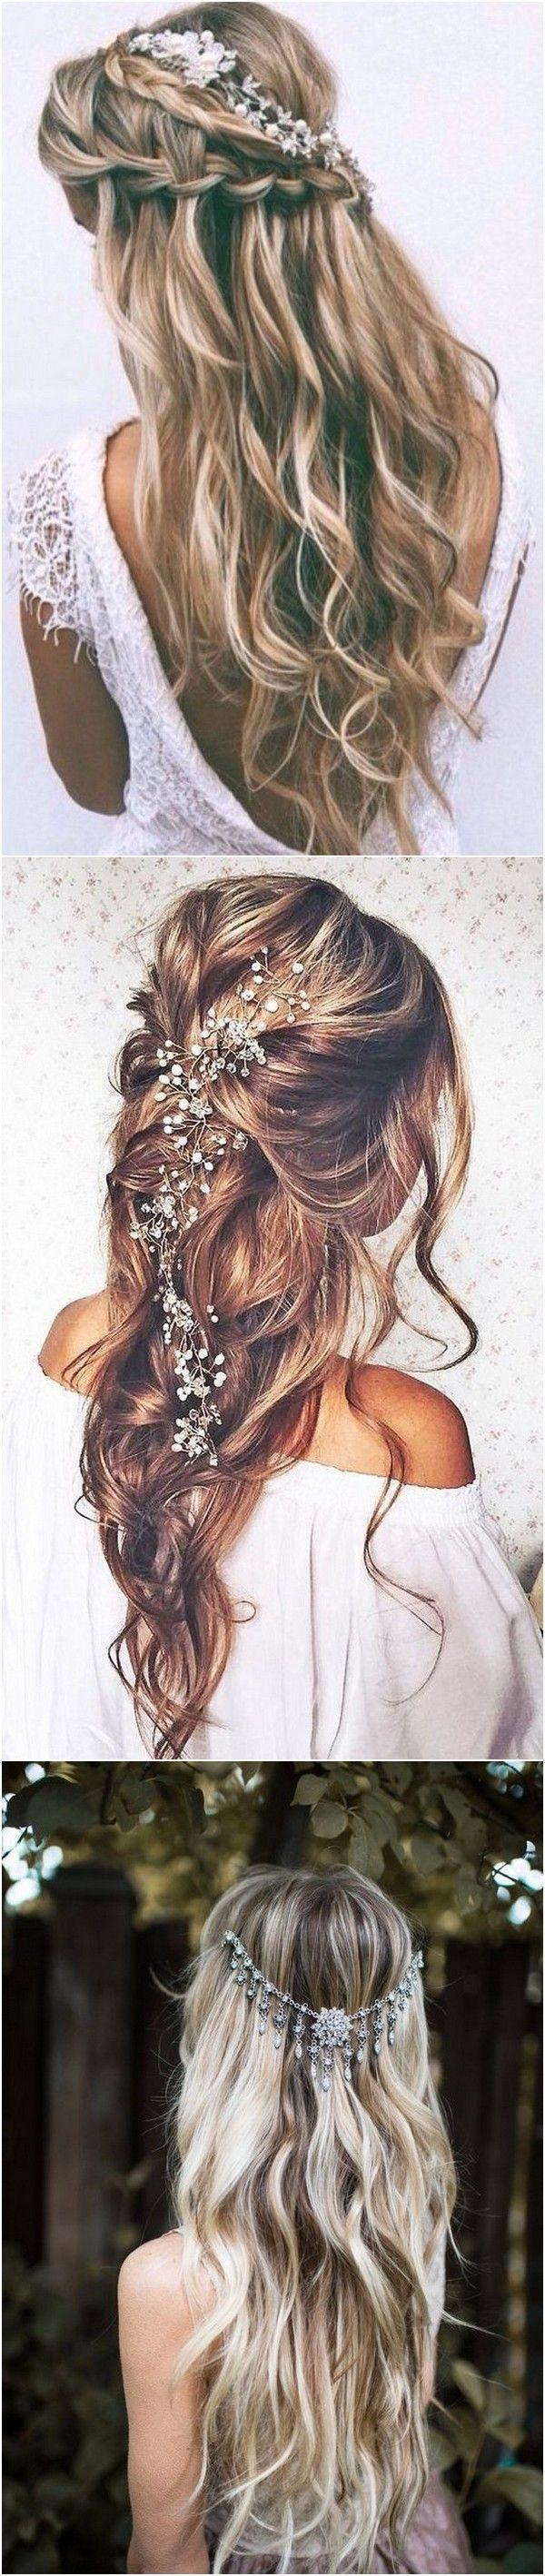 Mariage - 20 Boho Chic Wedding Hairstyles For Your Big Day